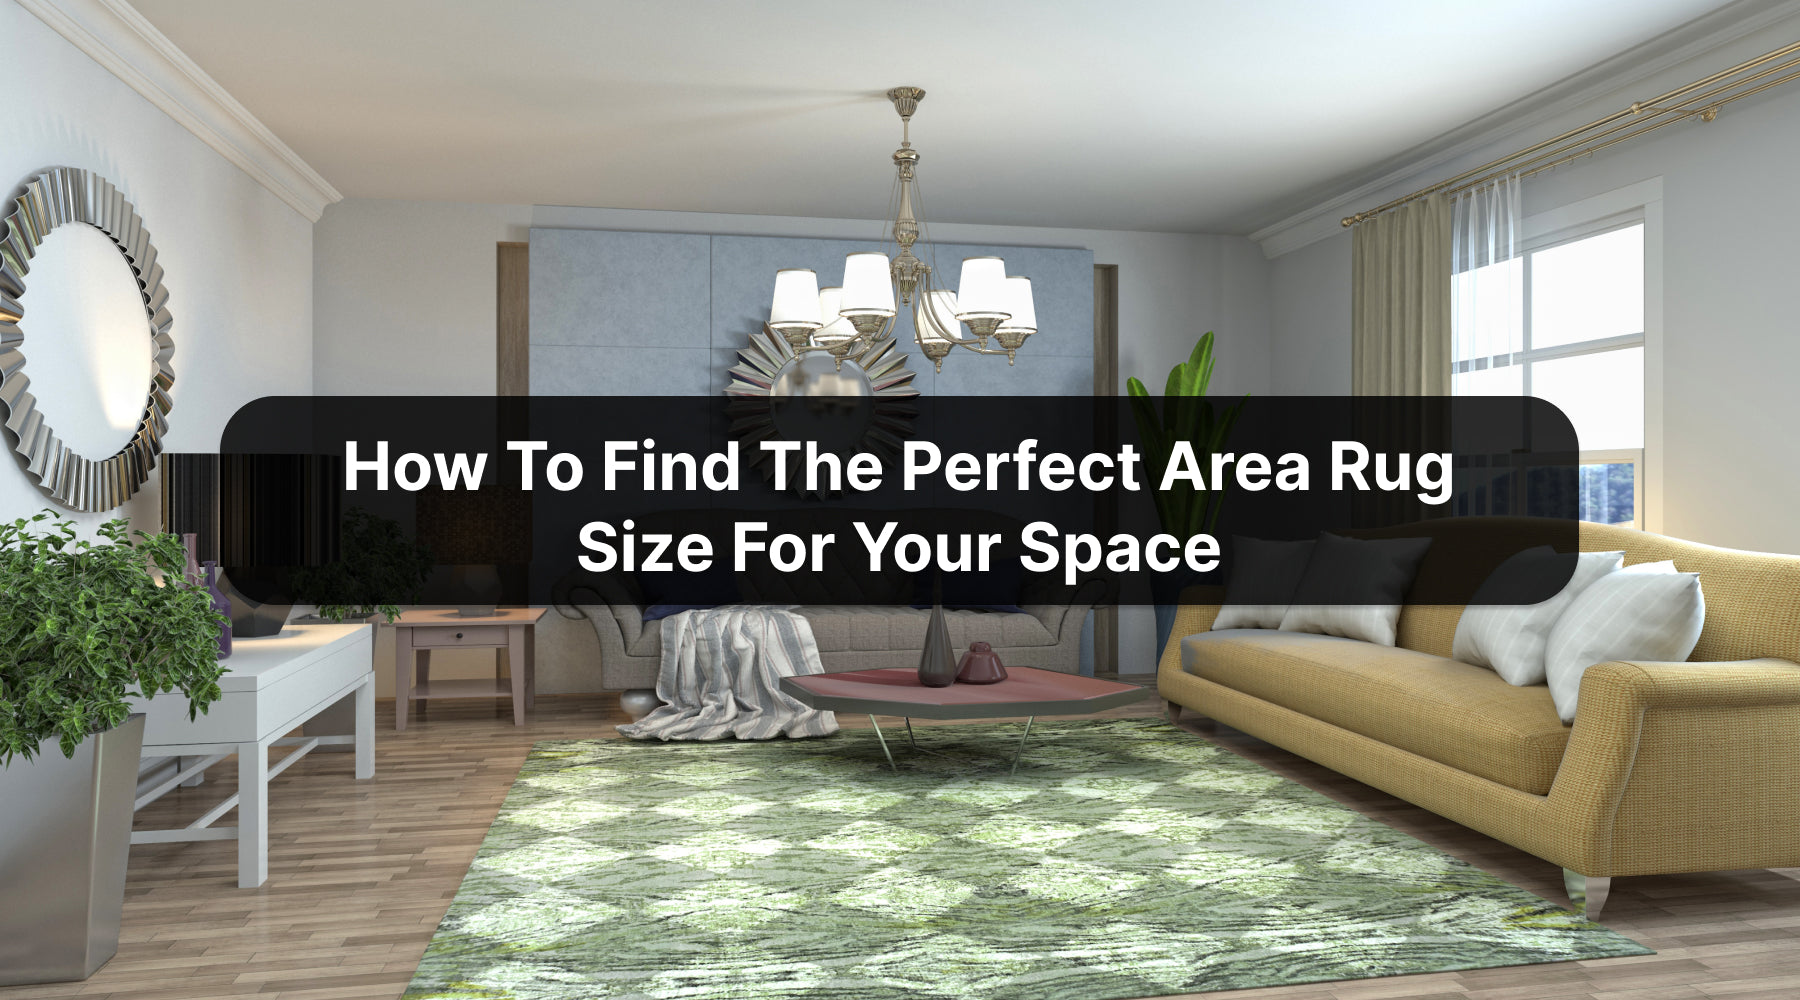 How to Find the Perfect Area Rug Size for Your Space